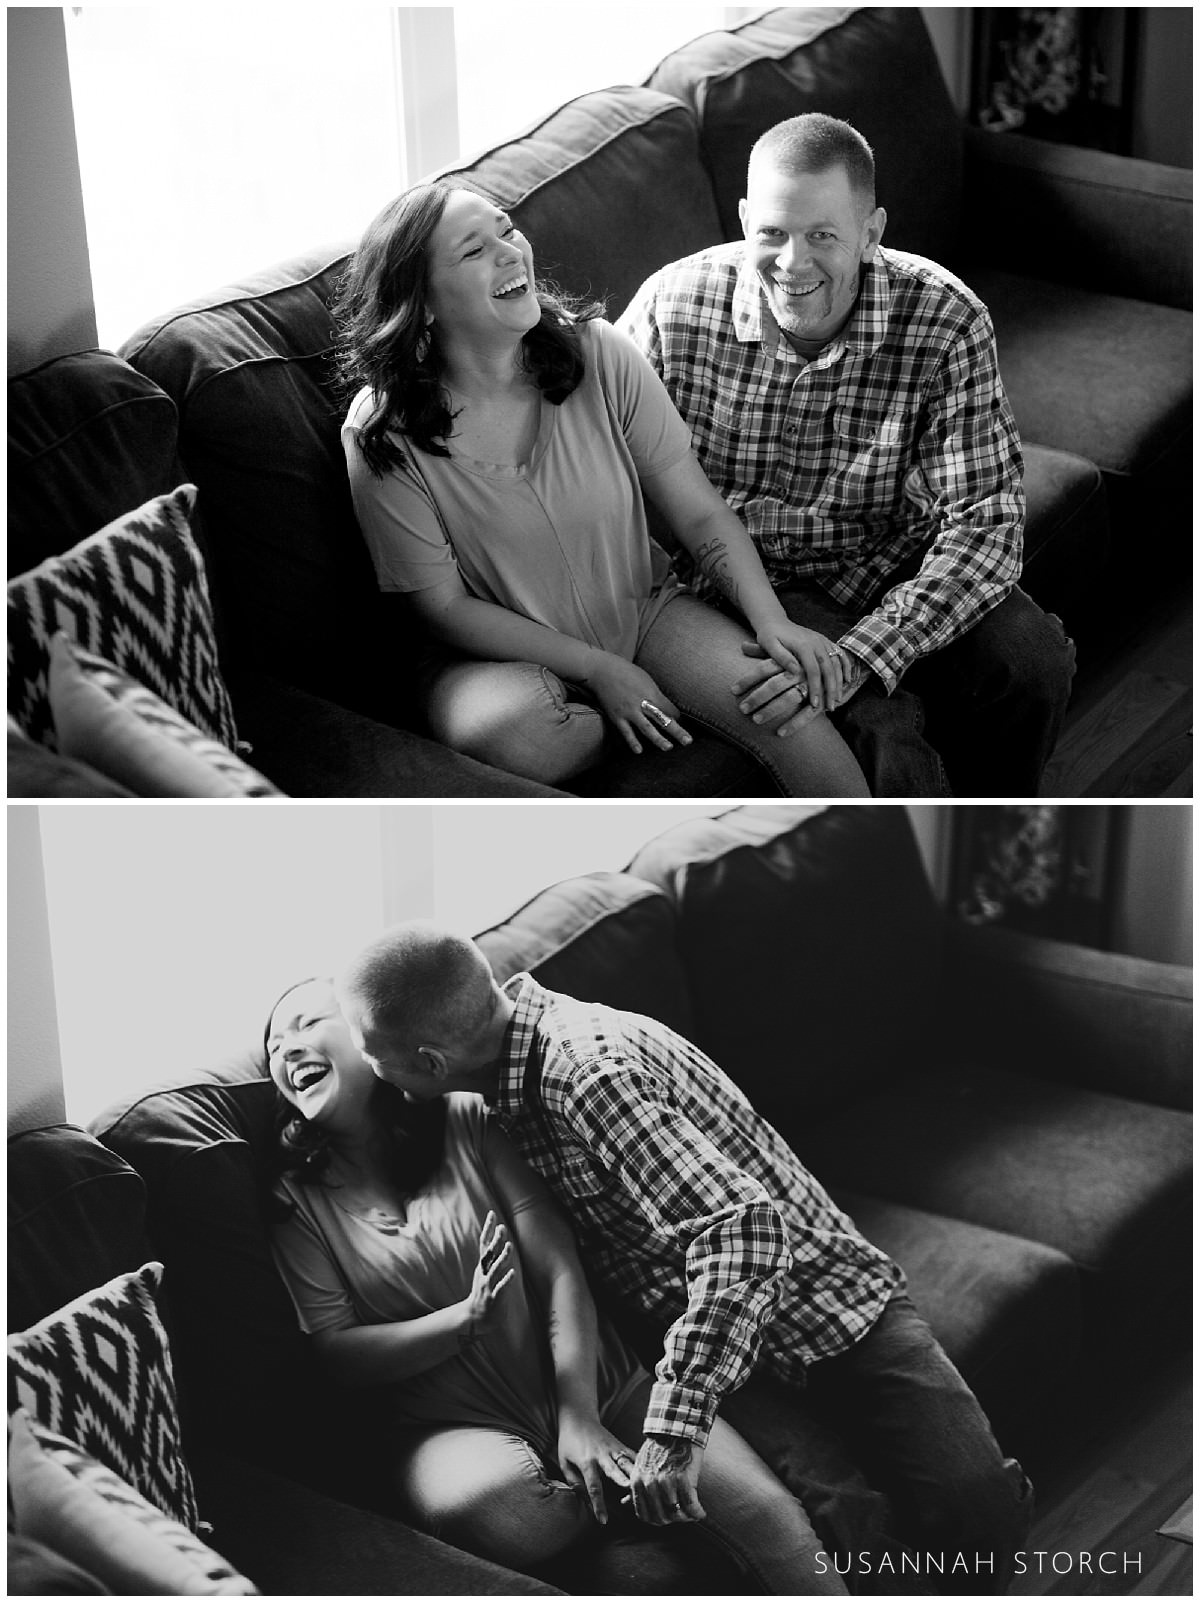 two black and white images of a man and woman laughing